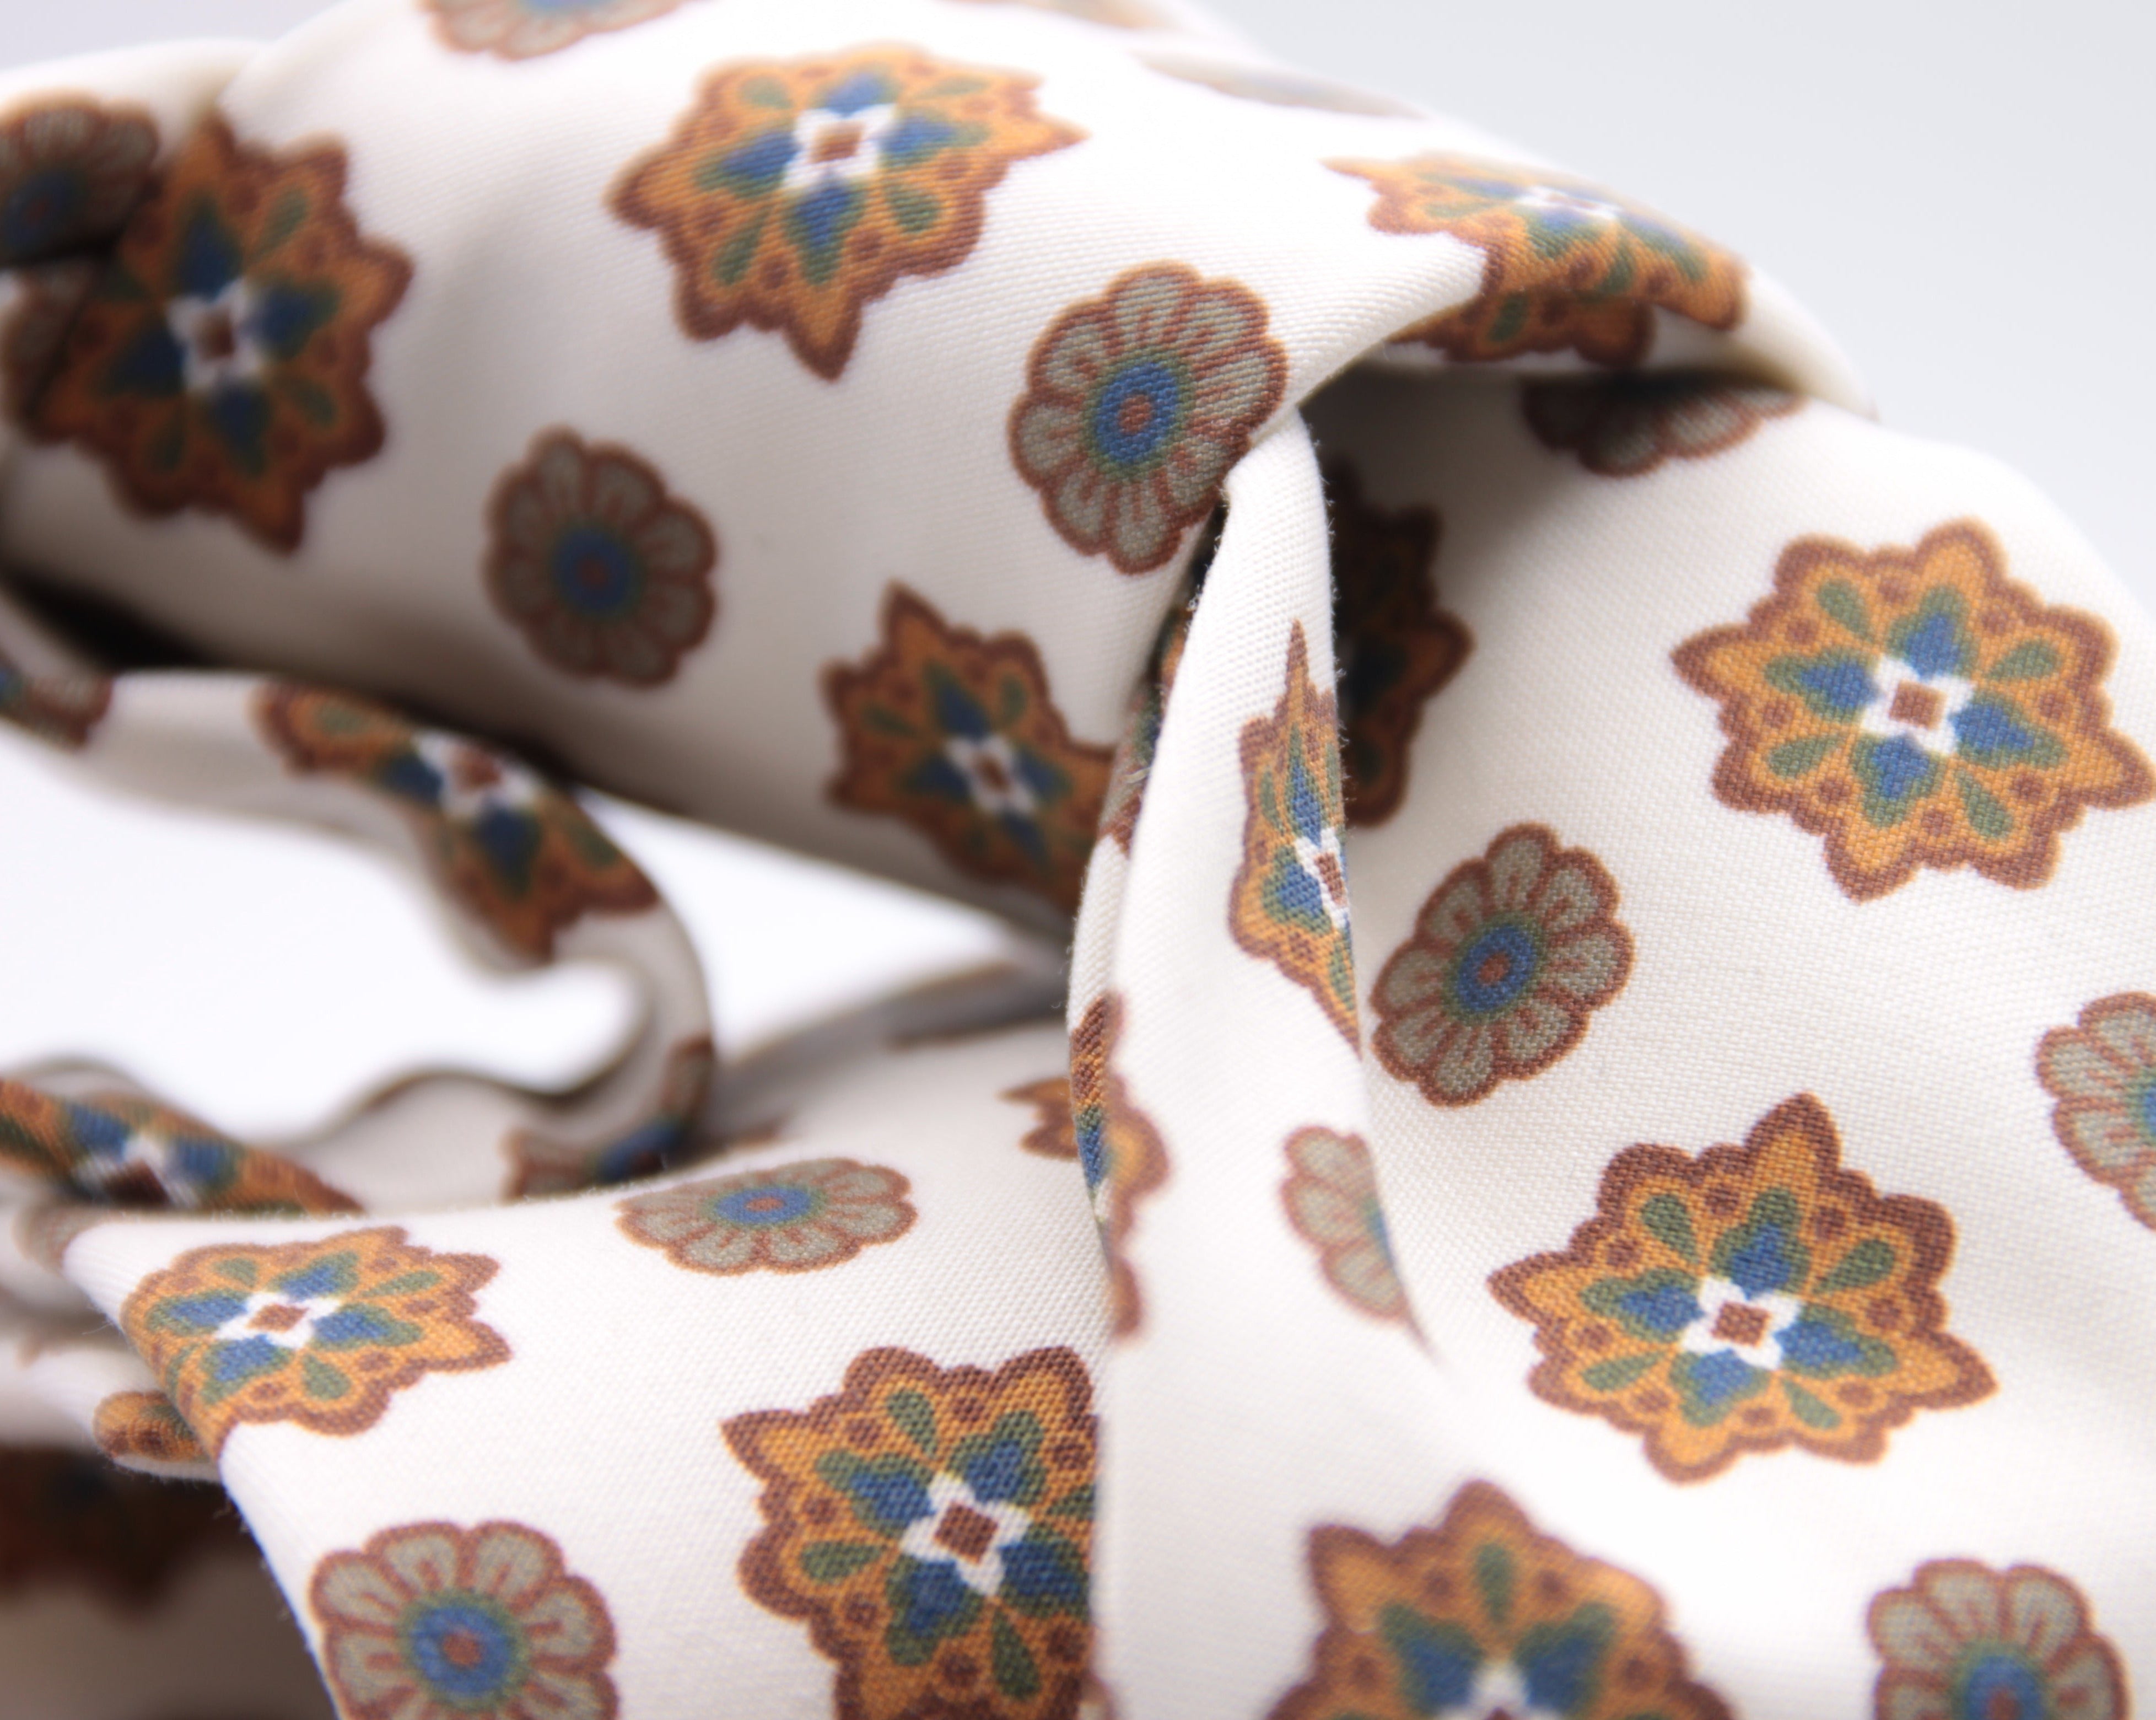 Cruciani & Bella 100% Printed Madder Silk  Italian fabric Unlined tie White, Brown and Beige Handmade in Italy 8 cm x 150 cm #5940